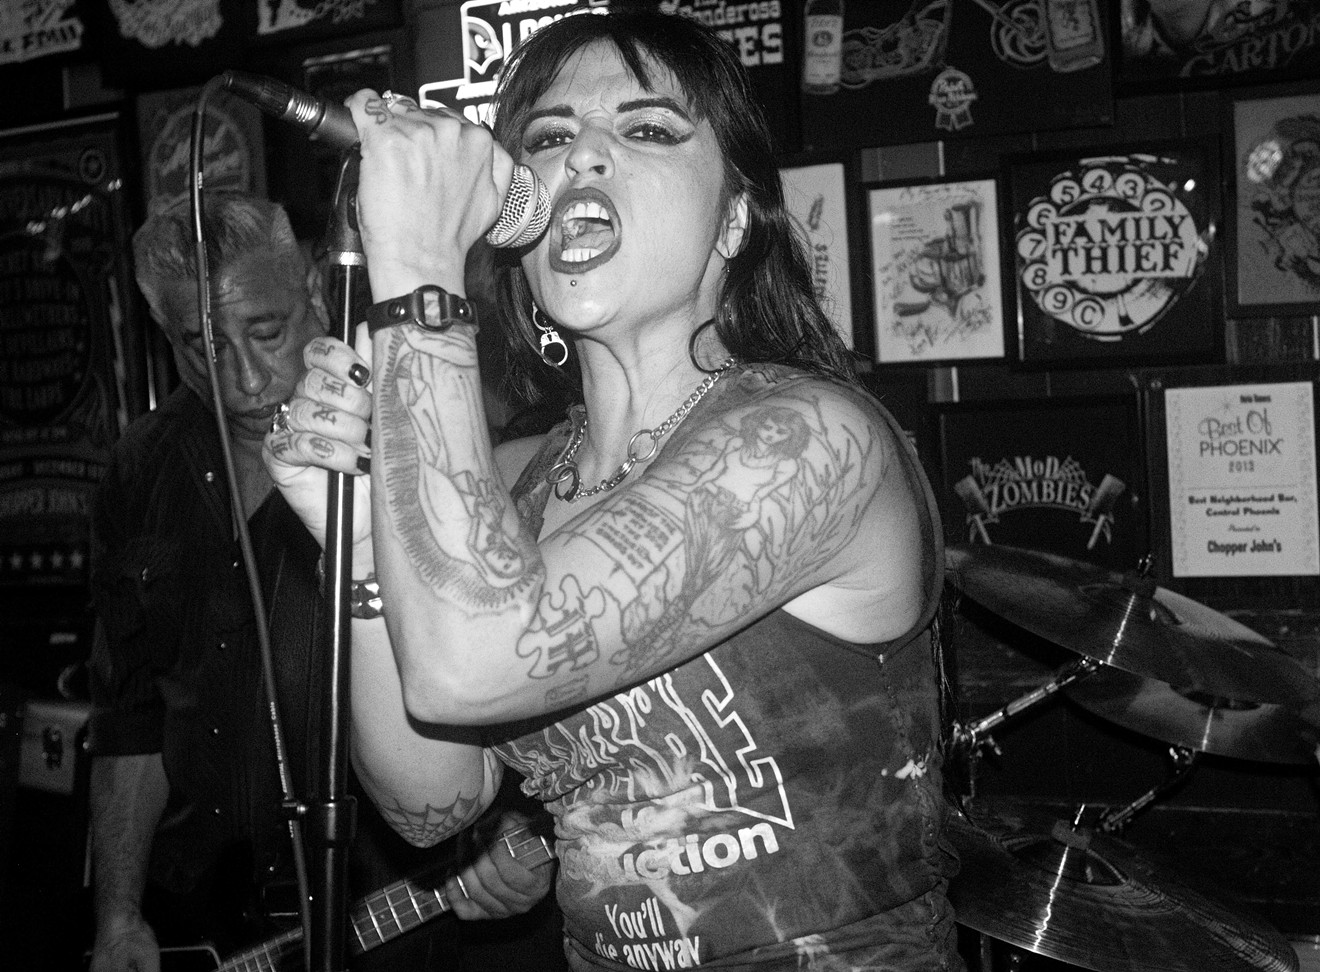 The late Sarah Shelton of The Brand with bassist Danny Bravo in the background at Chopper John's in Phoenix.